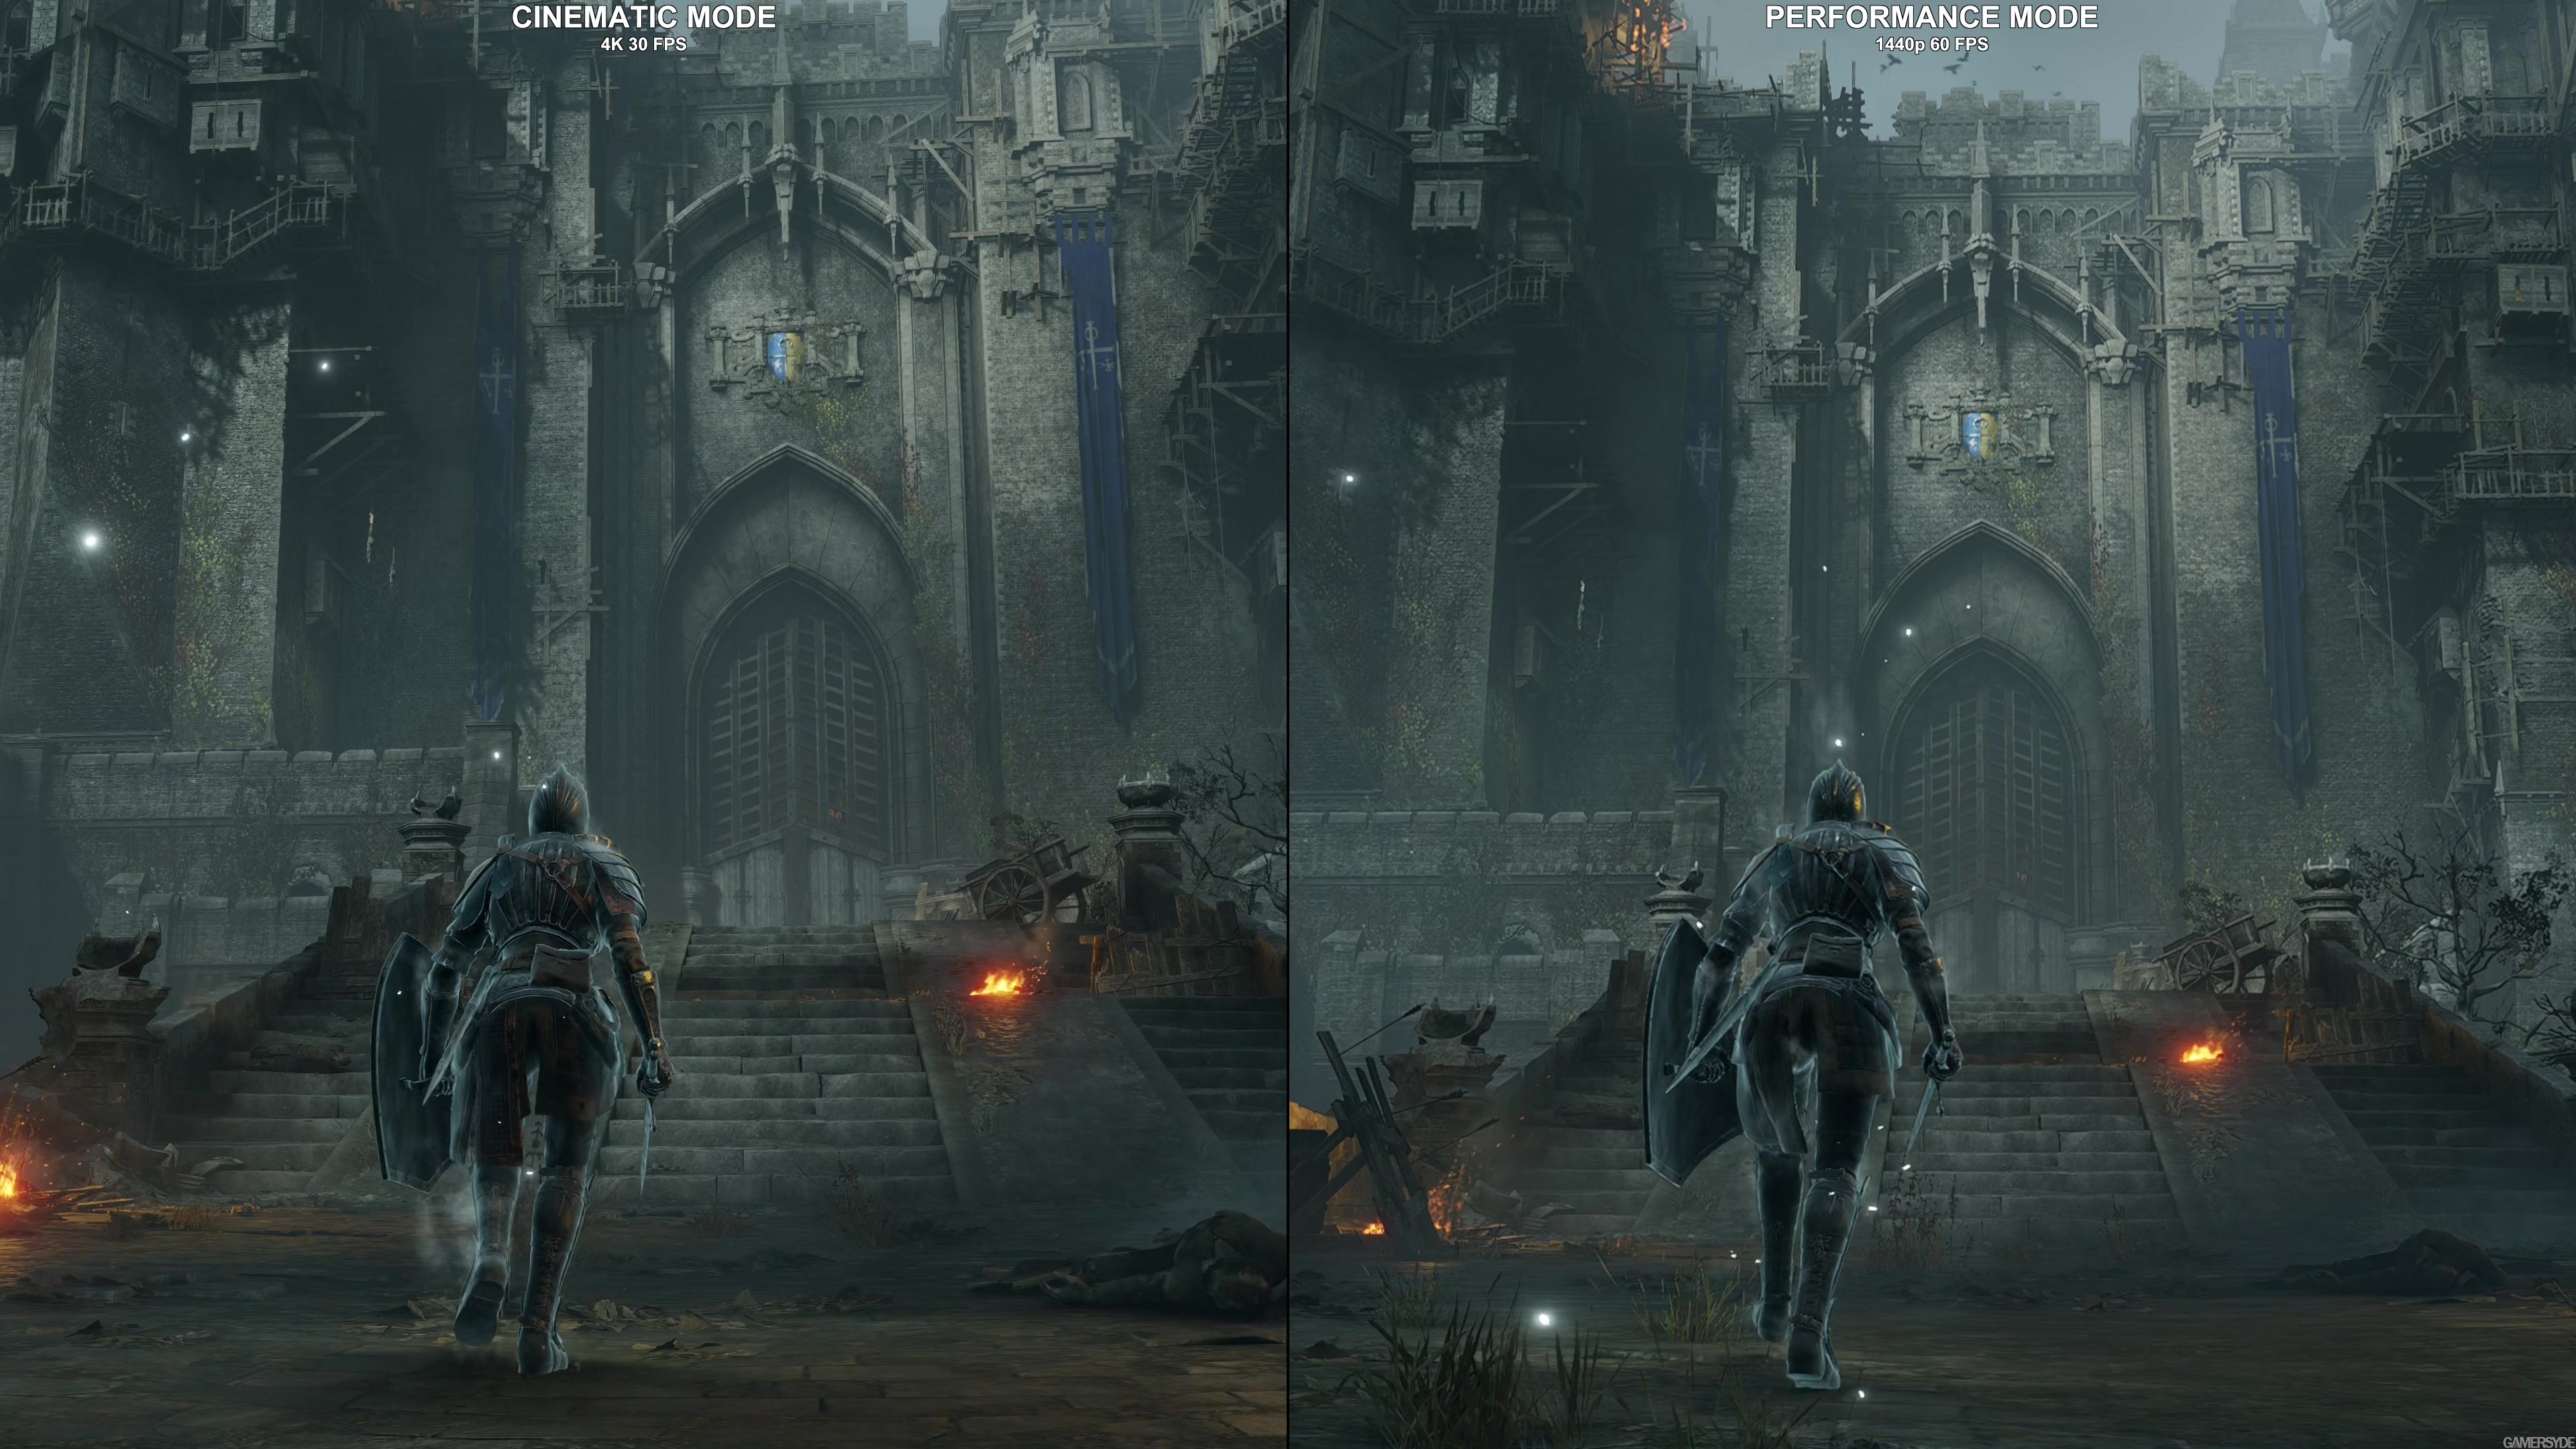 Broom Manhattan Remission Demon's Souls - Graphics modes - Comparison (PS5/4K) - High quality stream  and download - Gamersyde